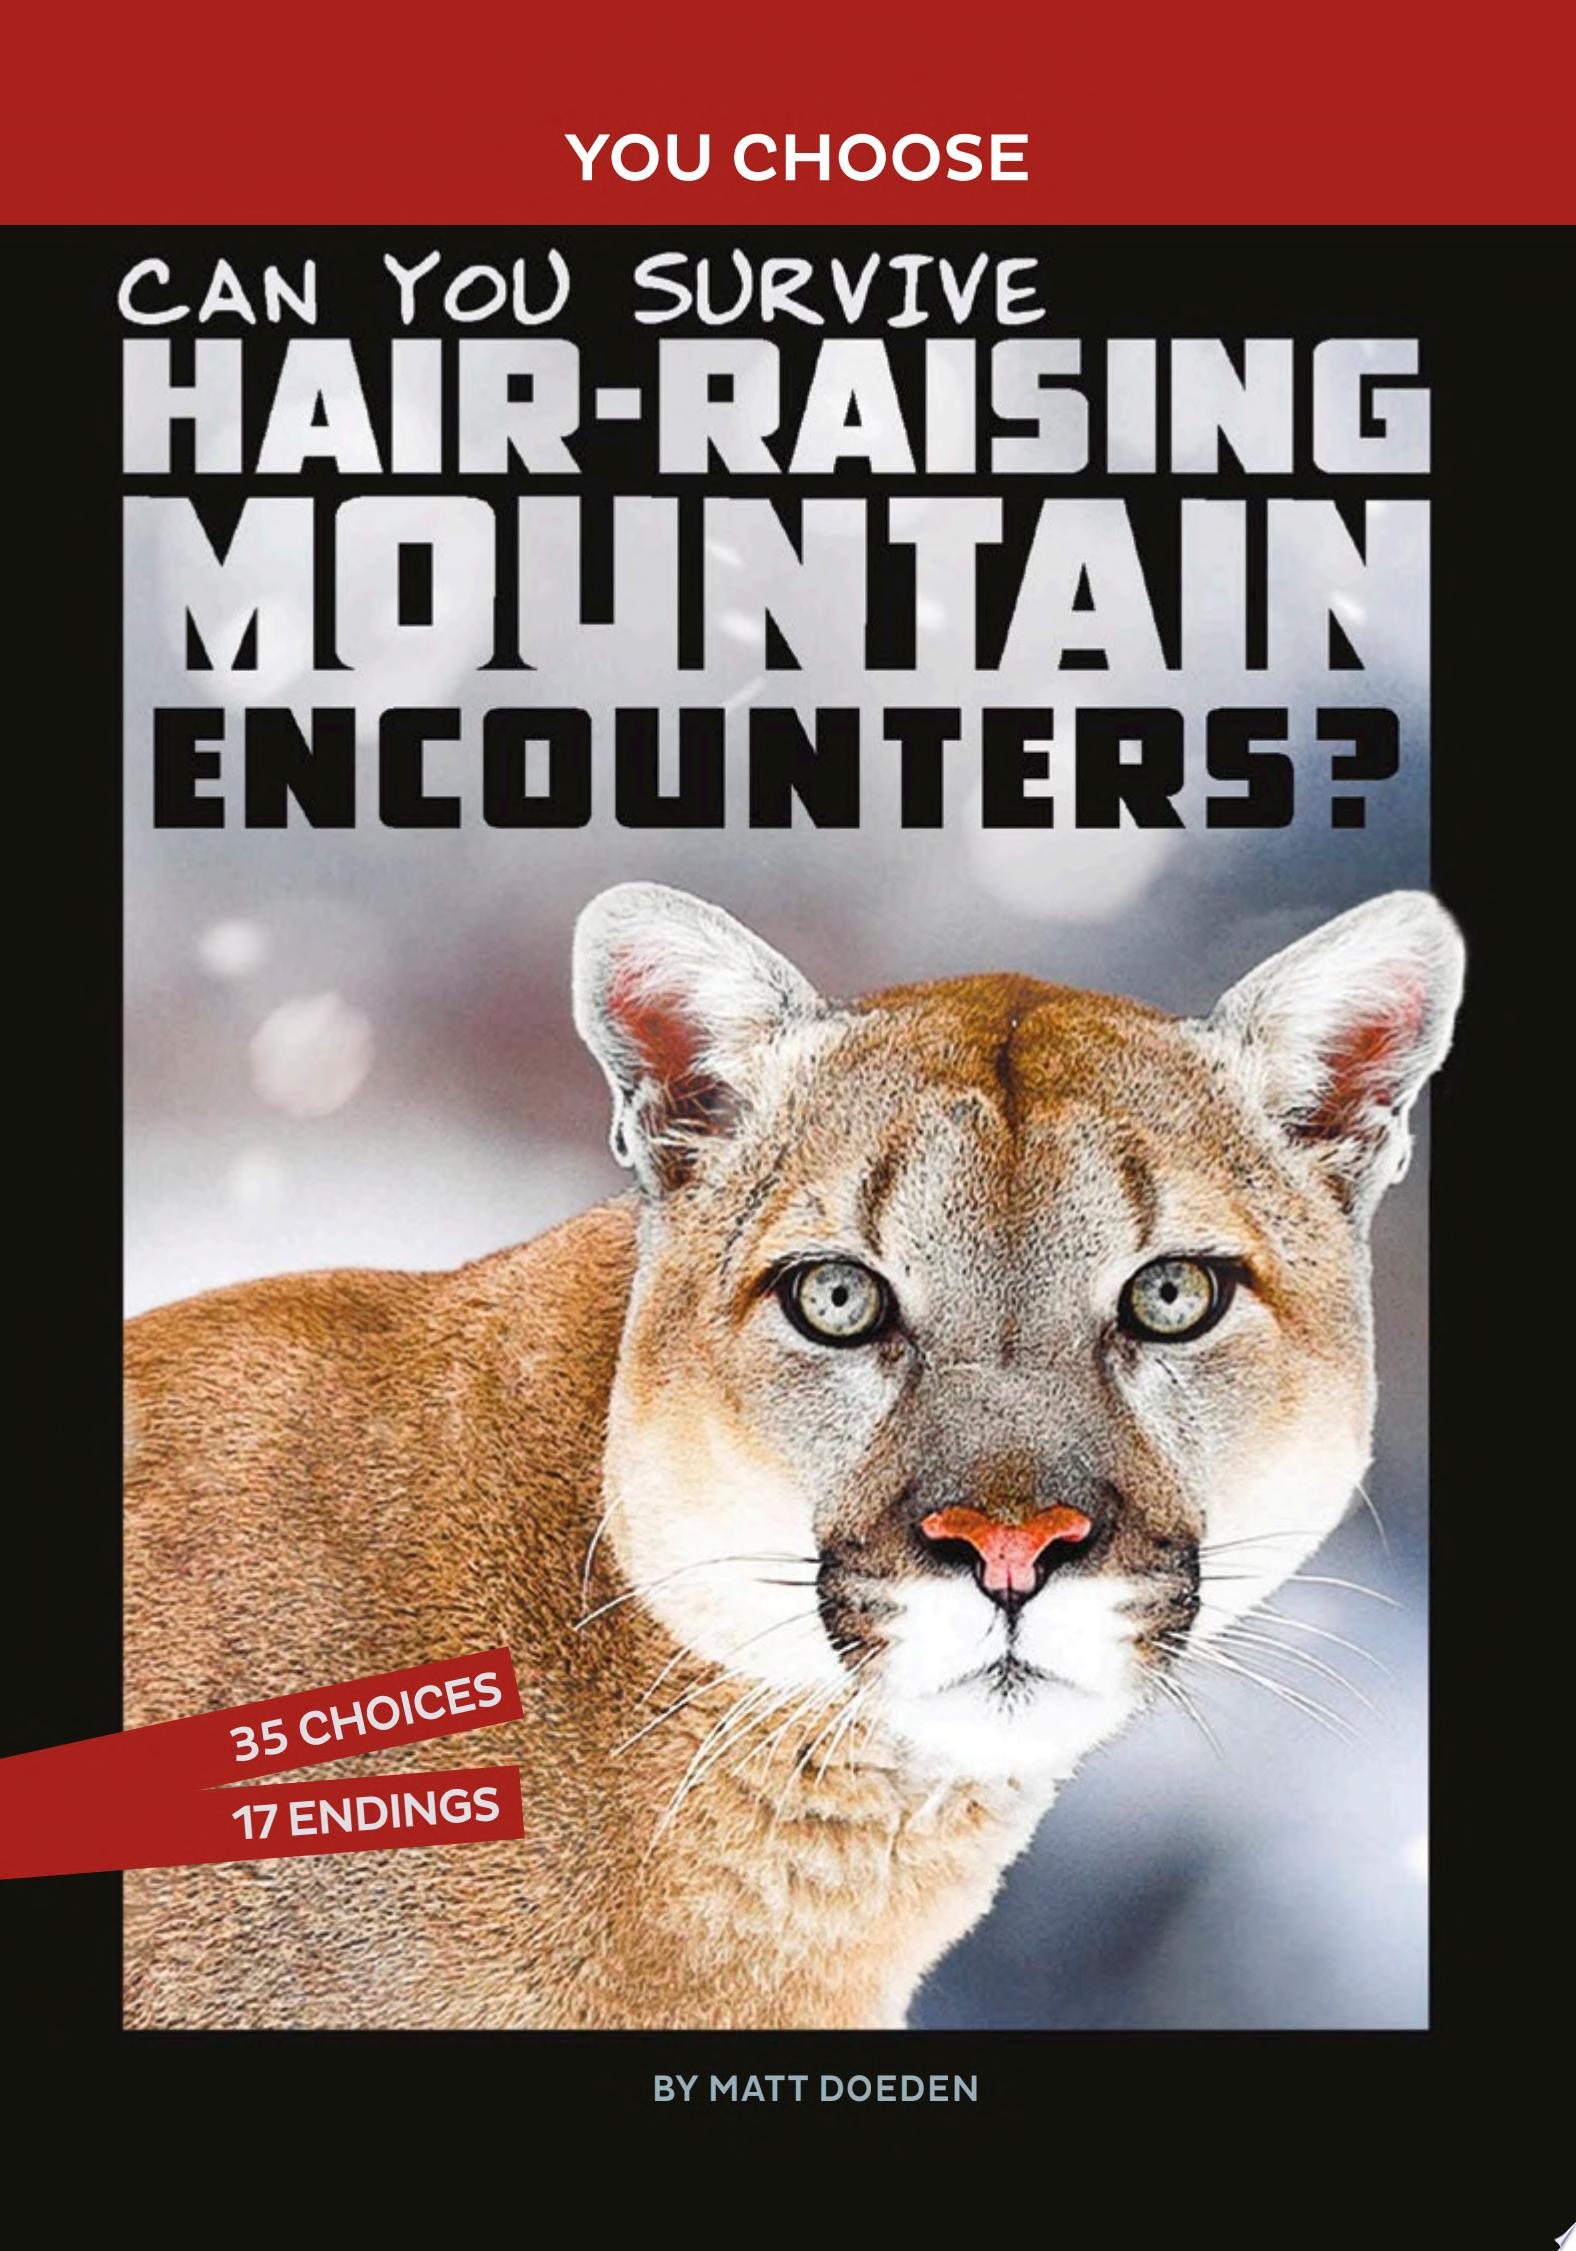 Image for "Can You Survive Hair-Raising Mountain Encounters?"